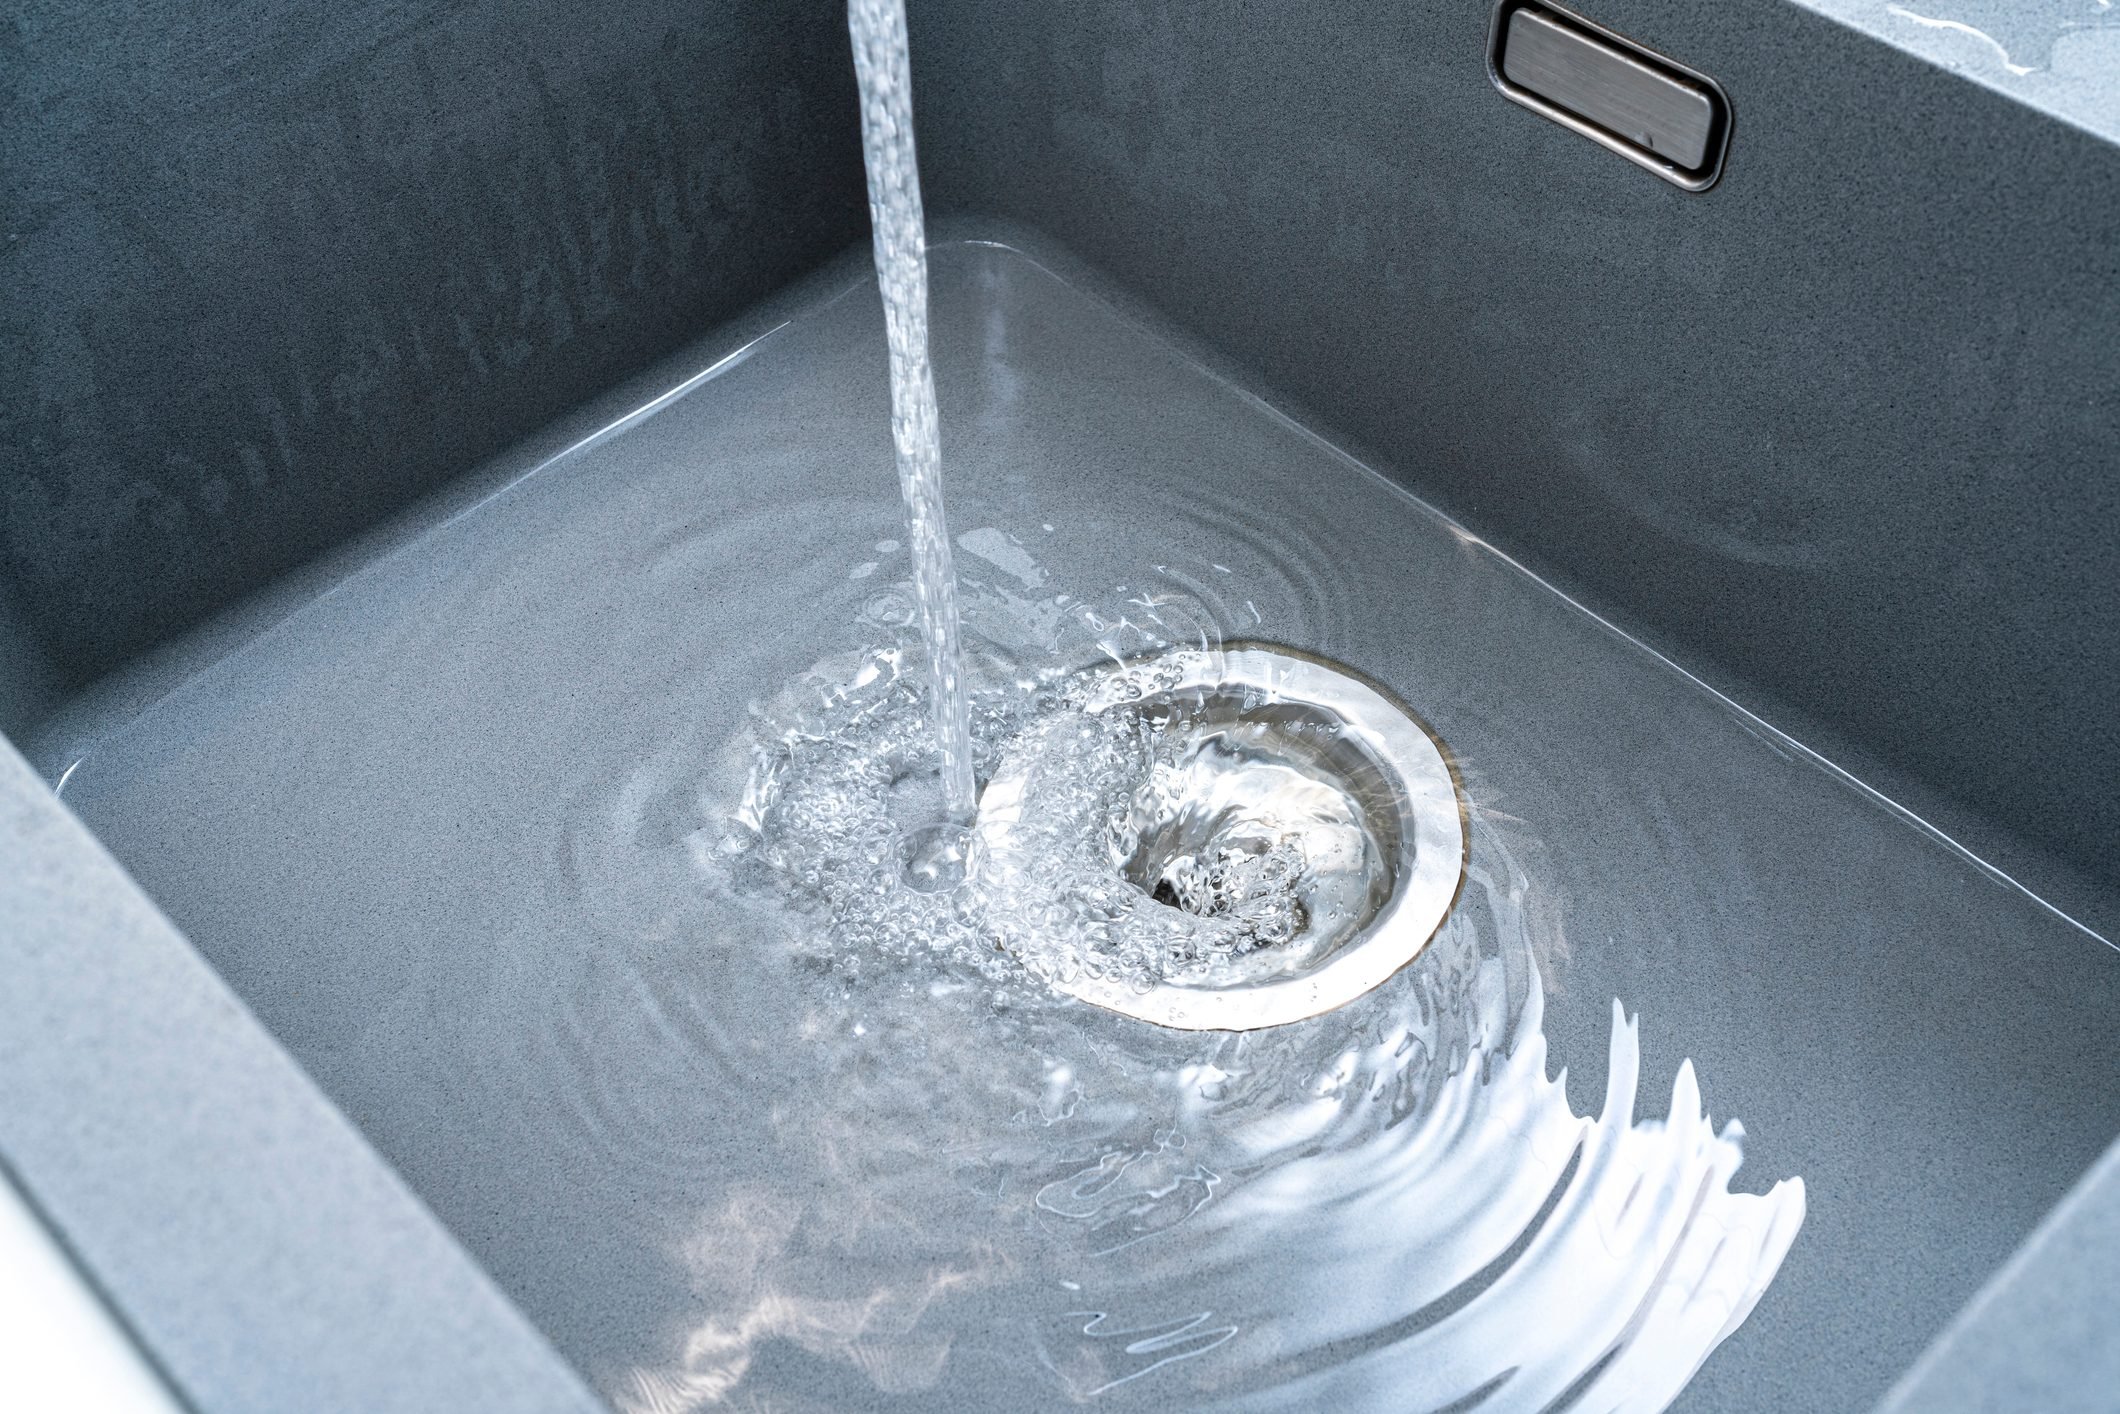 Get Rid of Clogged Drains Without Breaking a Sweat